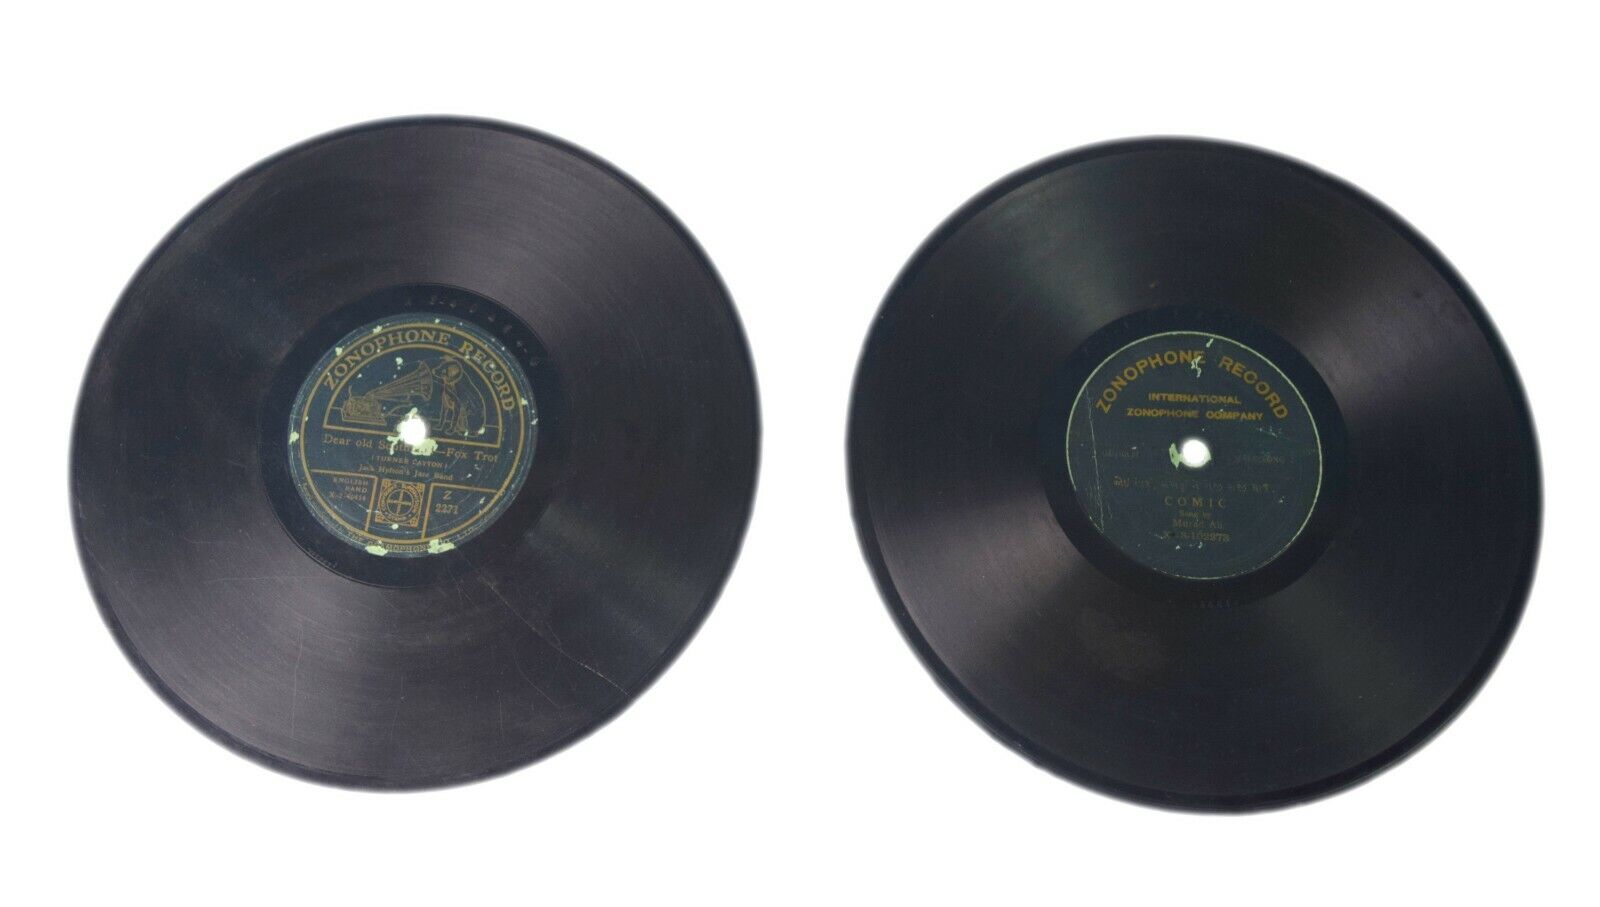 Vintage Zonophone Record – Old Indian Wall Decorative Gramophone Record i46-314